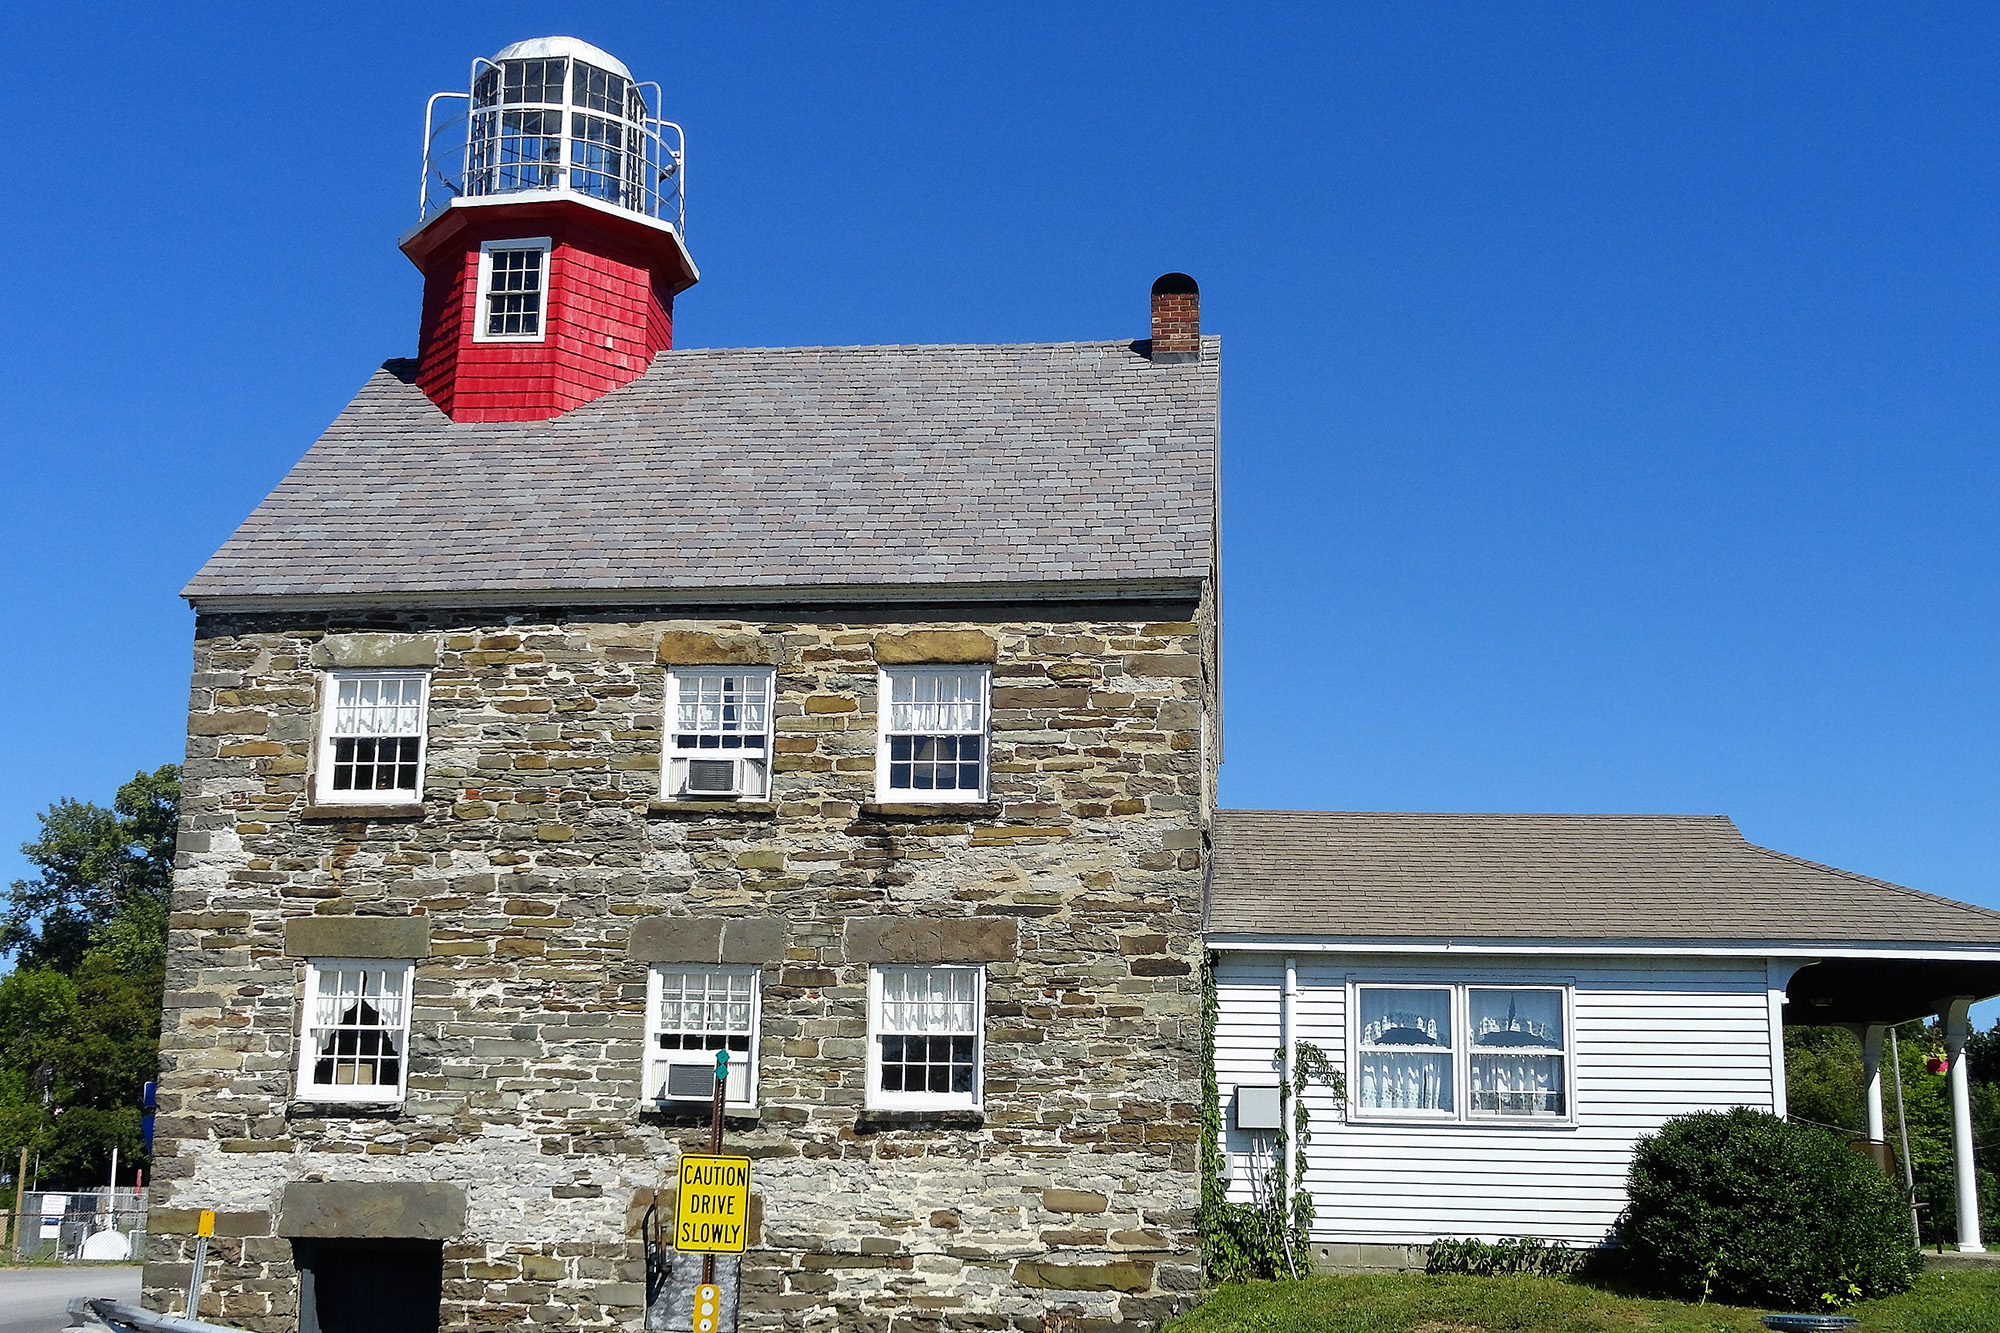 The birdcage lantern atop the Salmon River Lighthouse is one of only a few remaining in service today.